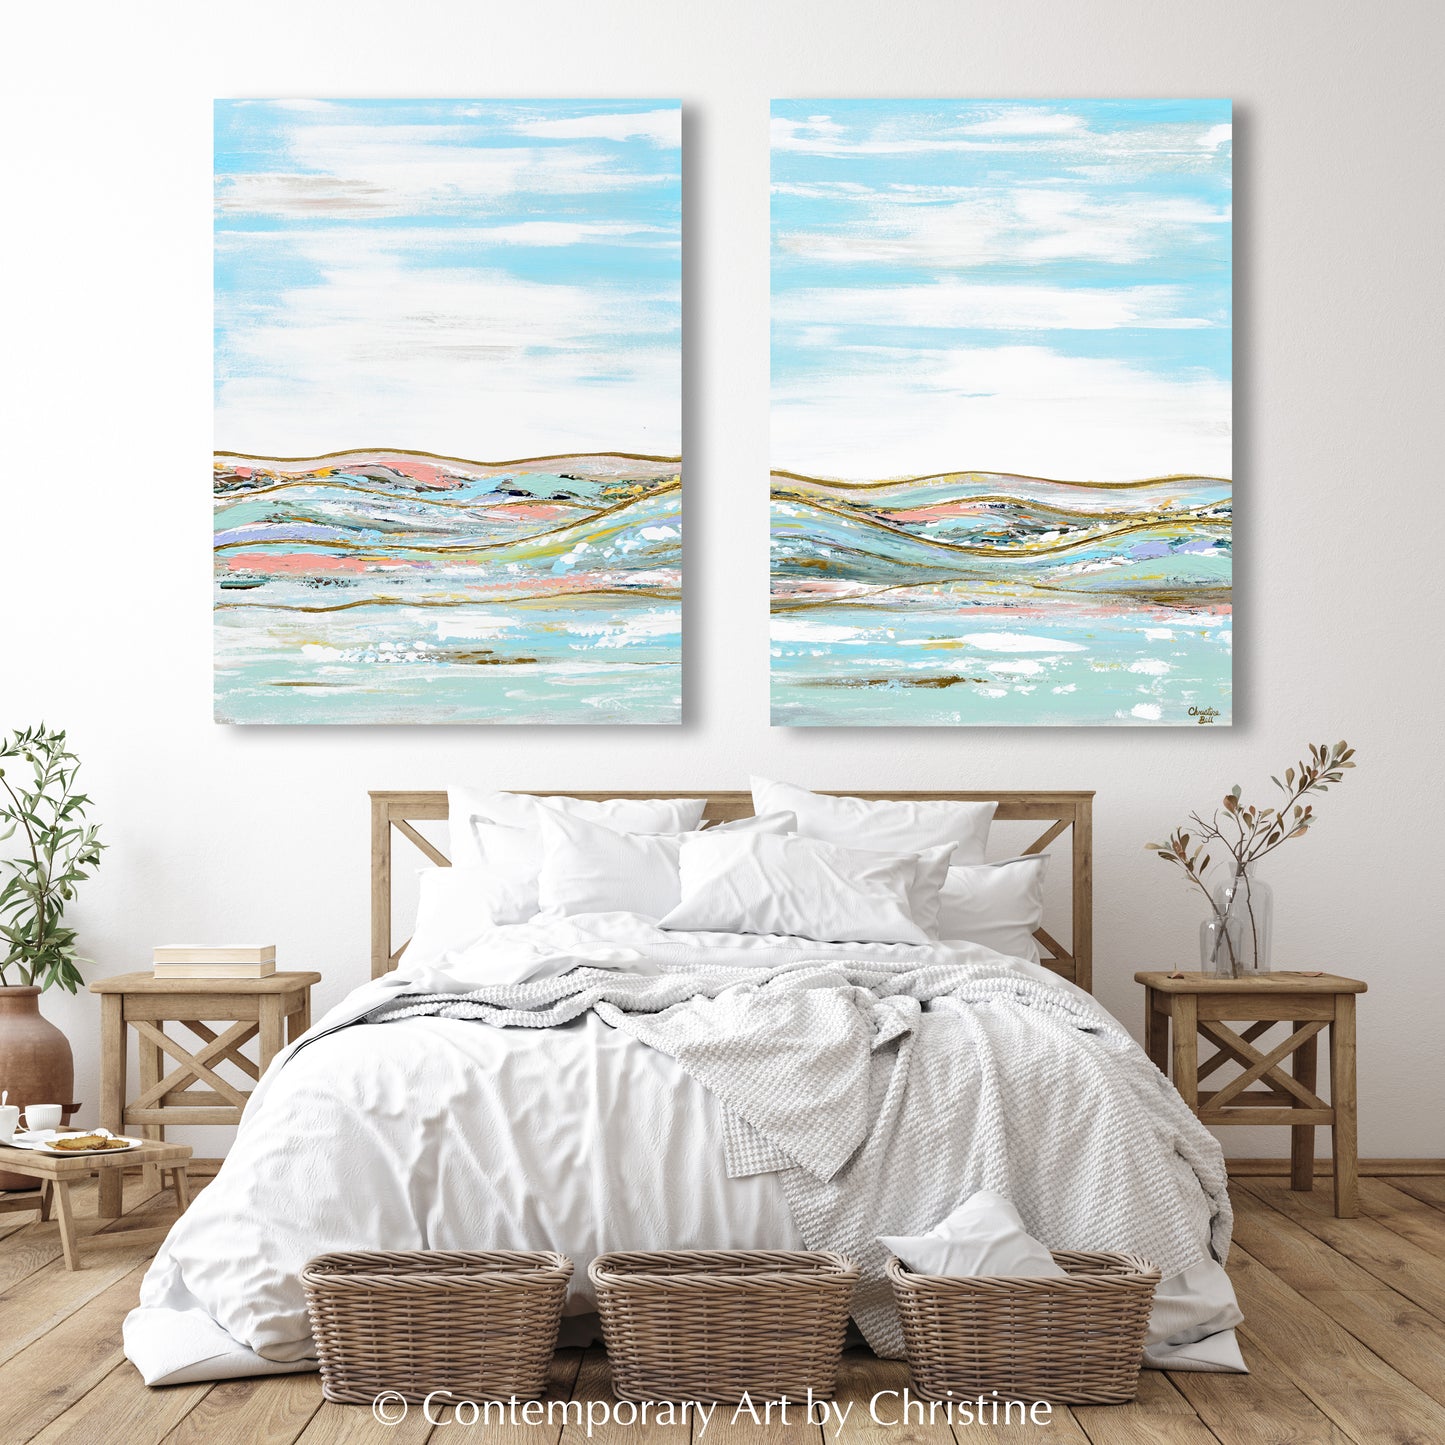 "Heavenly Day" ORIGINAL Art Diptych Abstract Landscape Painting Textured 2 -Canvases, 60x40" Total